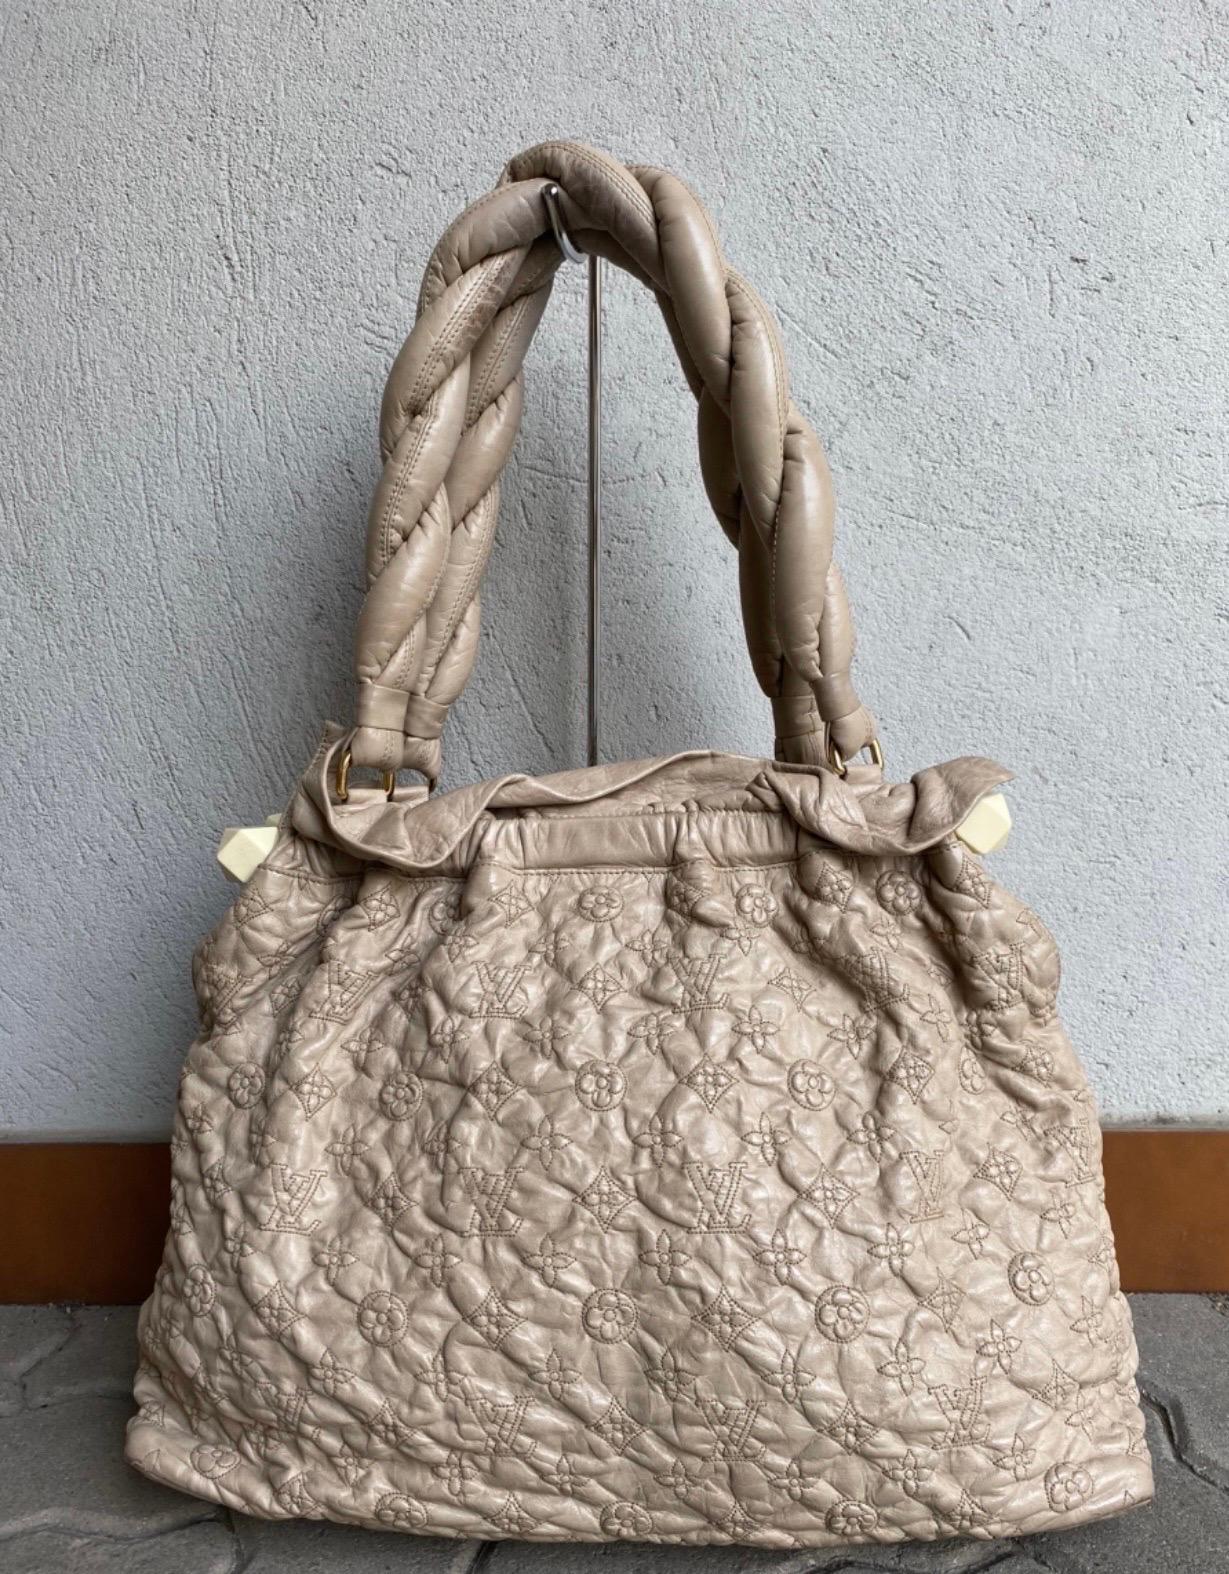 Louis Vuitton Olympe Status bag in monogram beige color leather.
on the front there is an ivory-colored plastic plate, also featuring a chain decorated in ivory-colored plastic, some small signs of age and use but in very good condition, closure